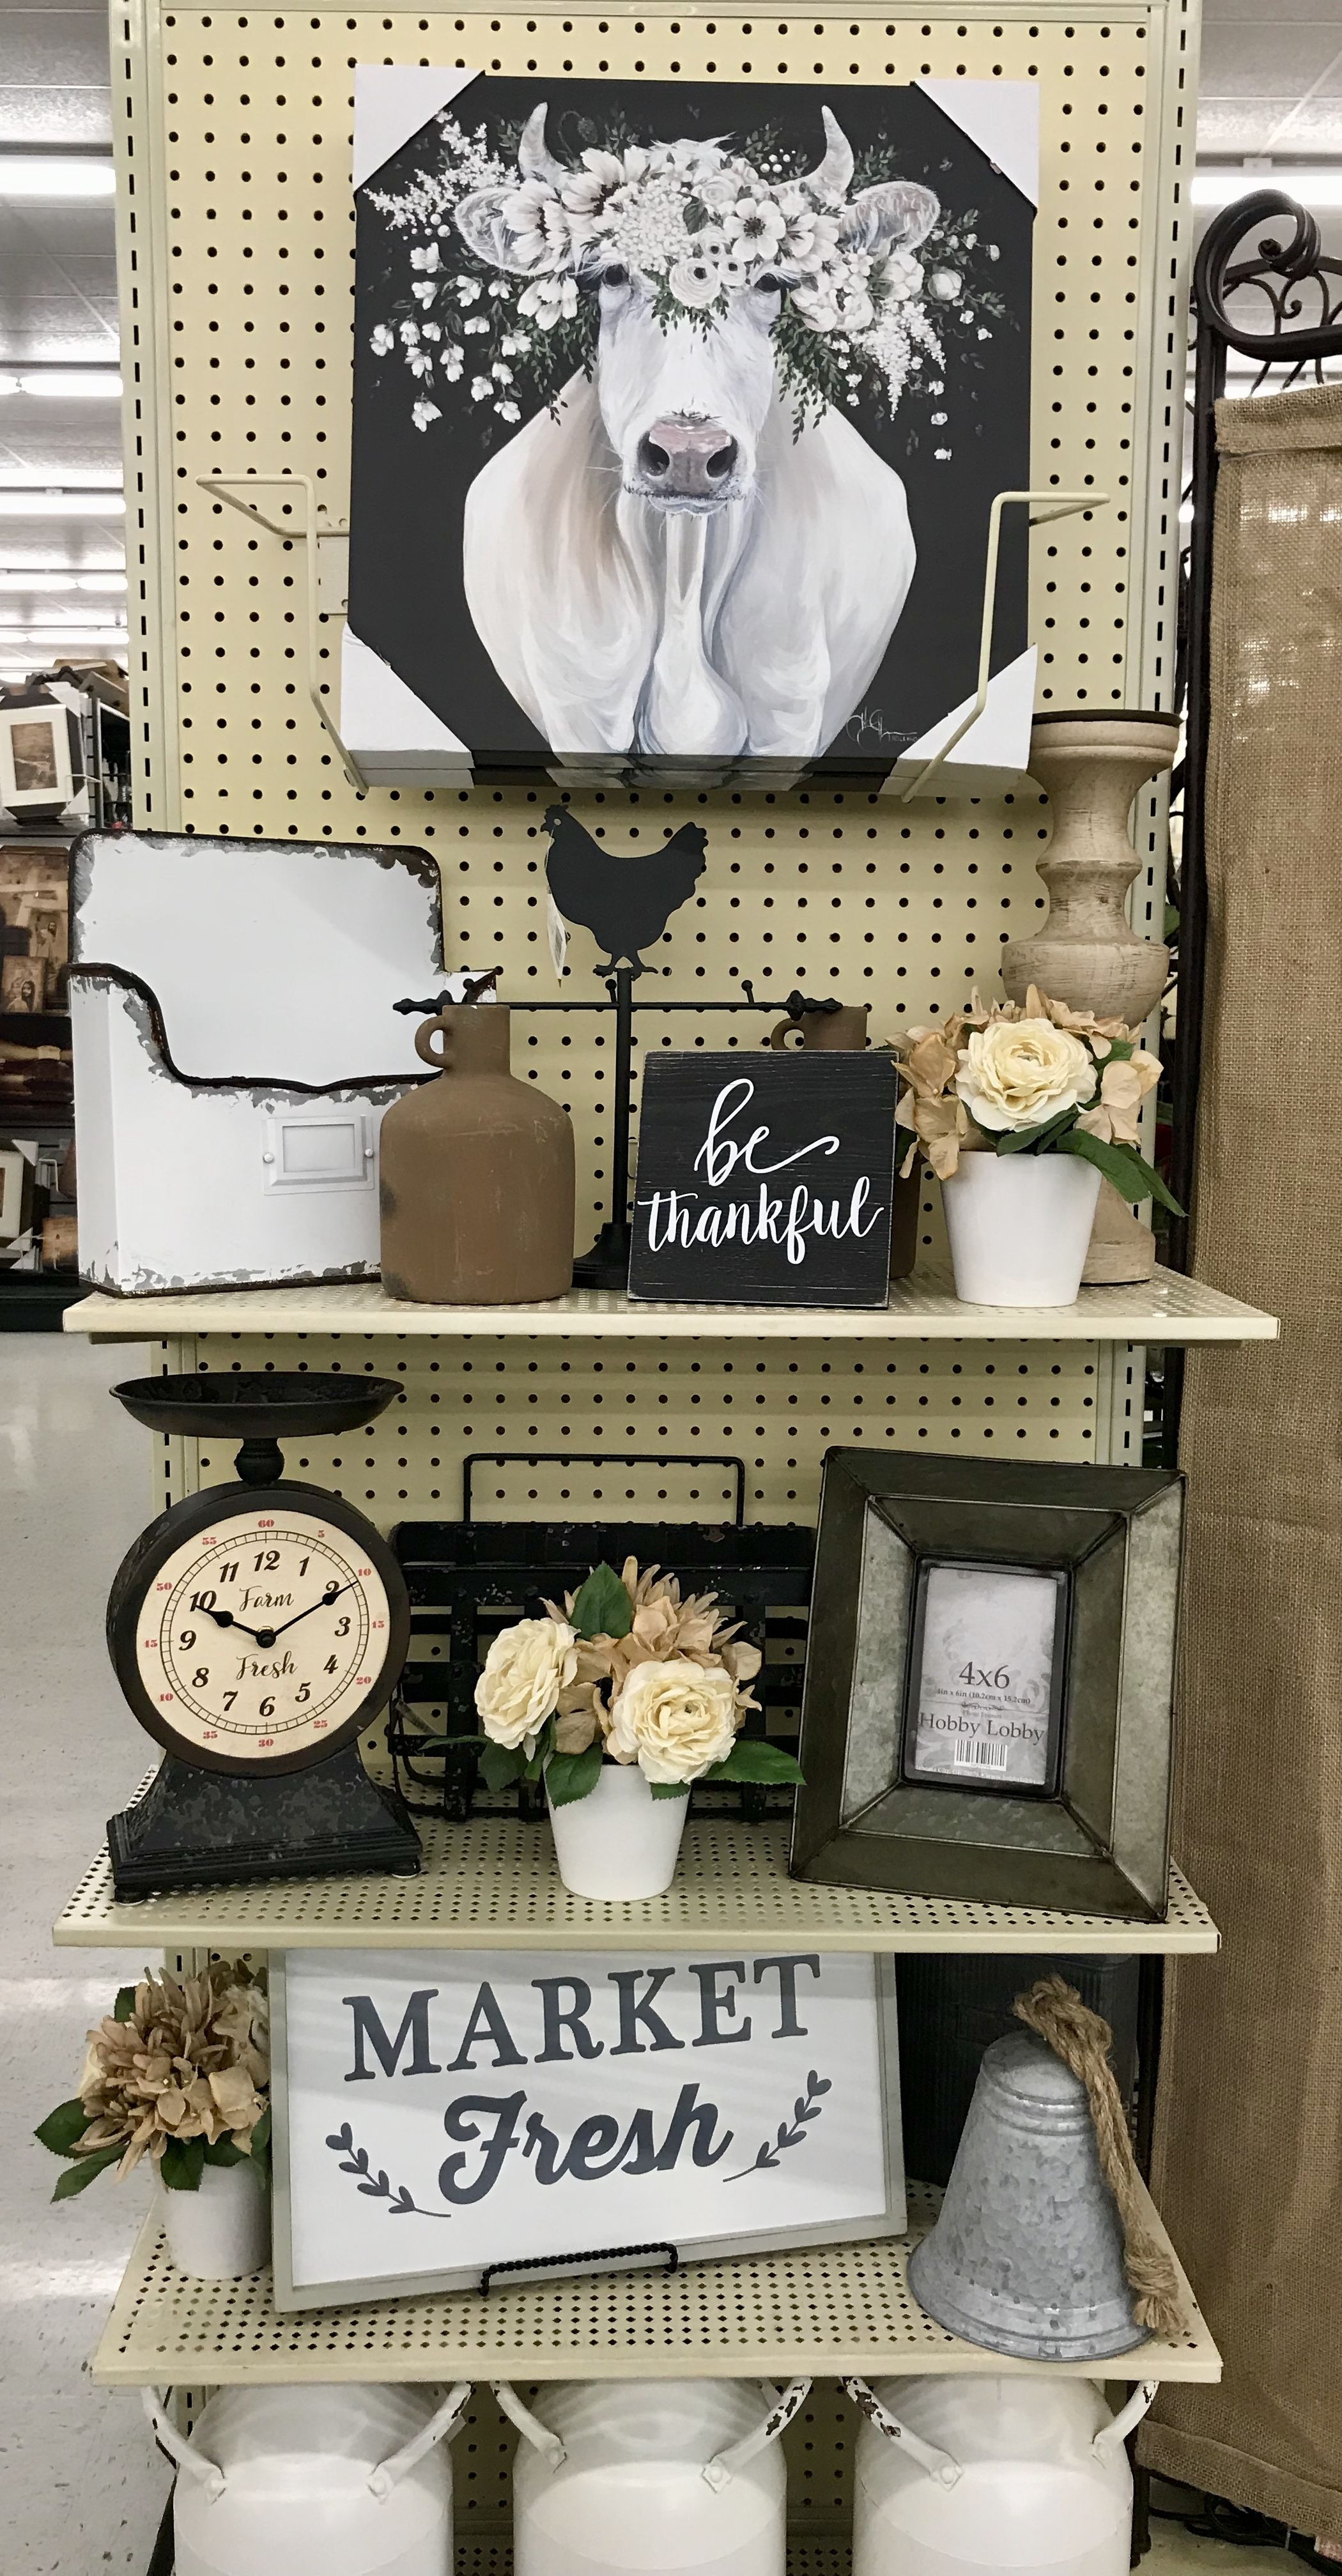 13 Great Hobby Lobby Wall Vase 2022 free download hobby lobby wall vase of hobby lobby merchandising table displays work for the home for hobby lobby merchandising table displays work